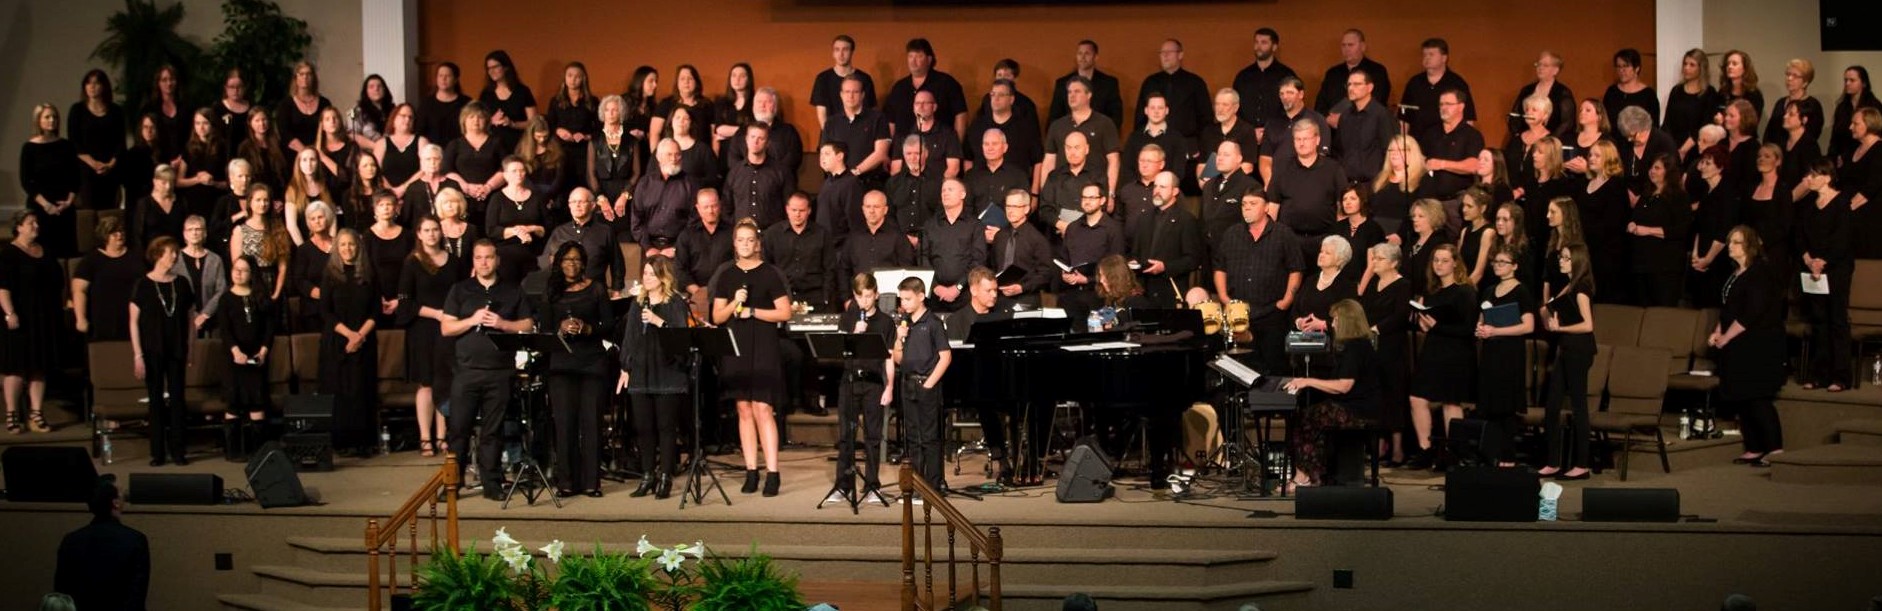 Central Baptist Church Choir released captivating new song 'The Way The Truth The Life'